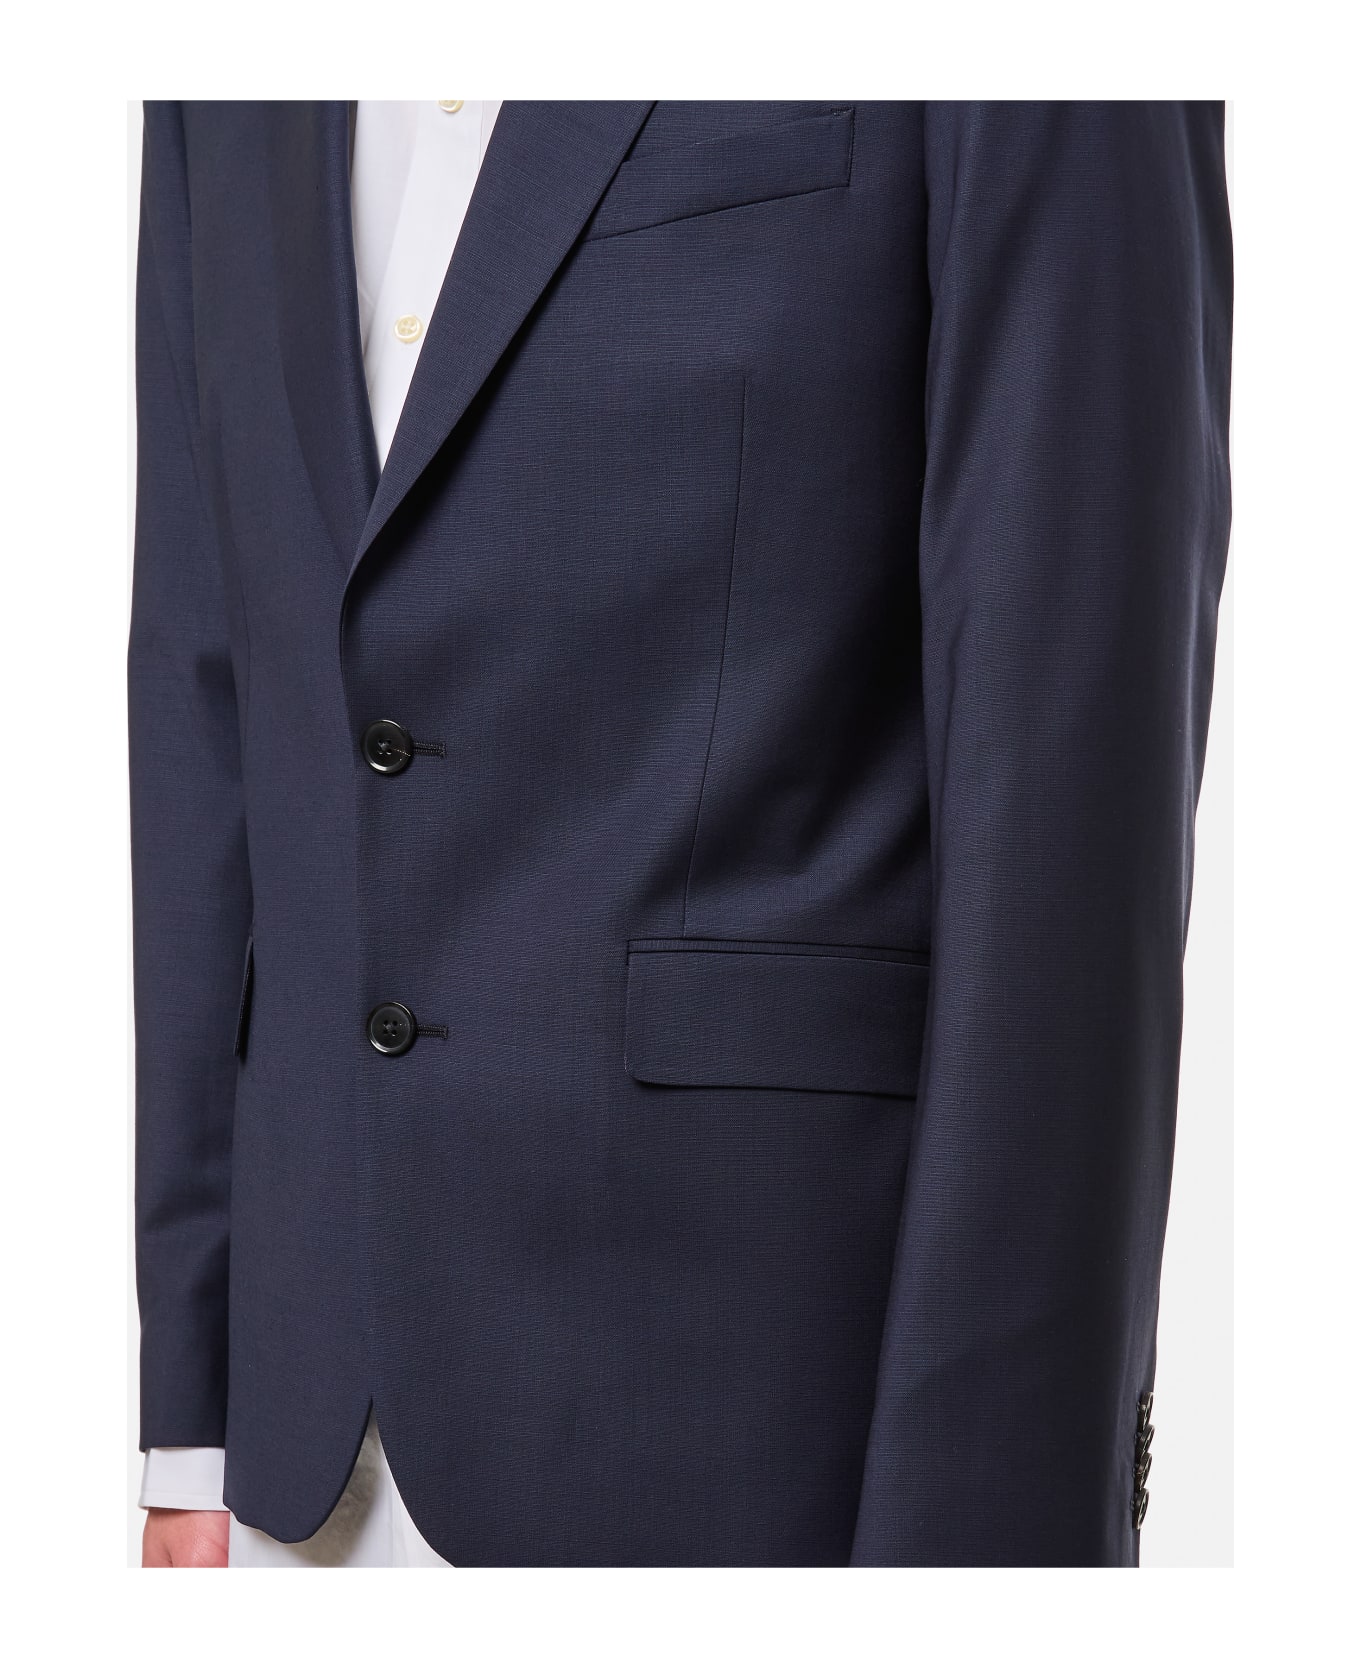 Paul Smith Tailored Fit Jacket - Blue スーツ